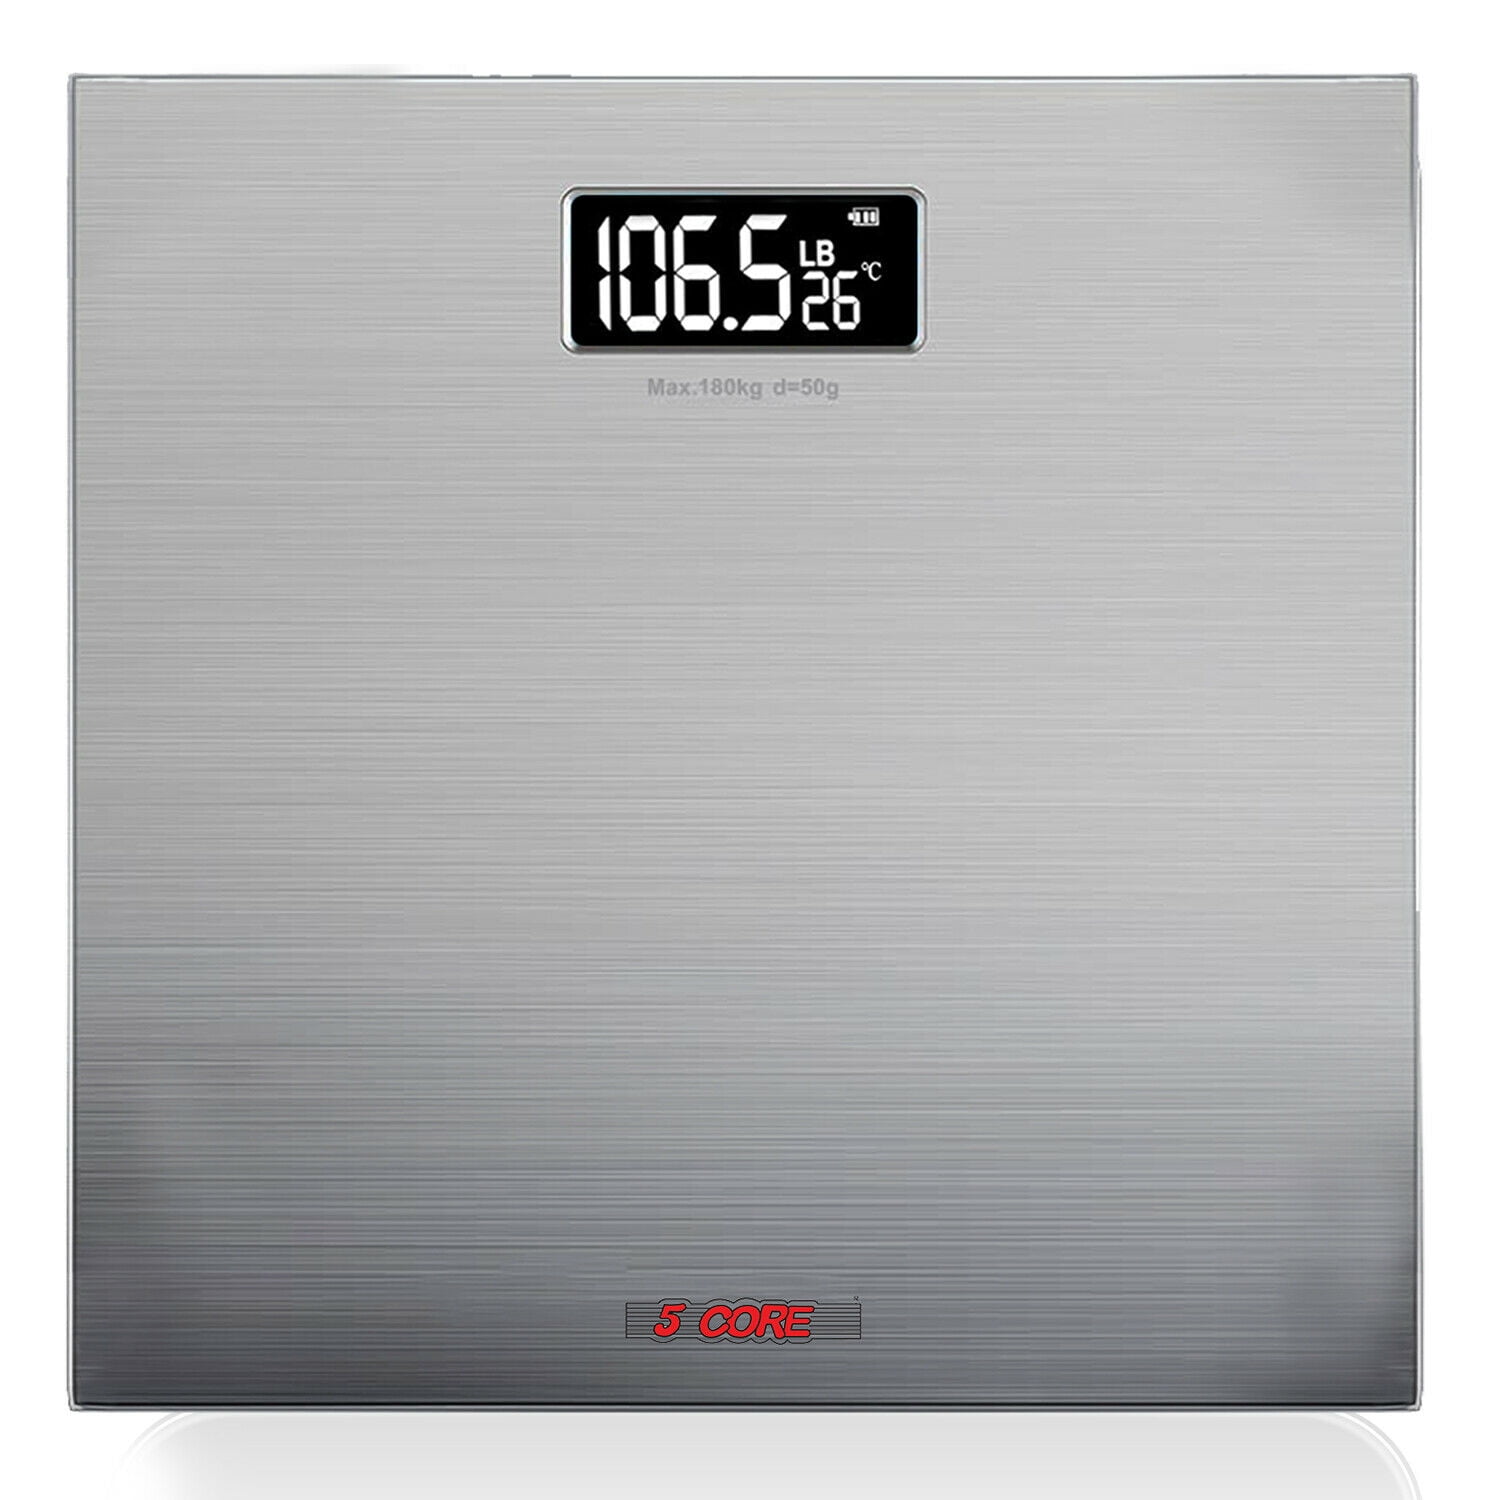 Dropship 5 Core Smart Digital Bathroom Weighing Scale With Body Fat And  Water Weight For People; Bluetooth BMI Electronic Body Analyzer Machine;  400 Lbs. BBS HL B BLK to Sell Online at